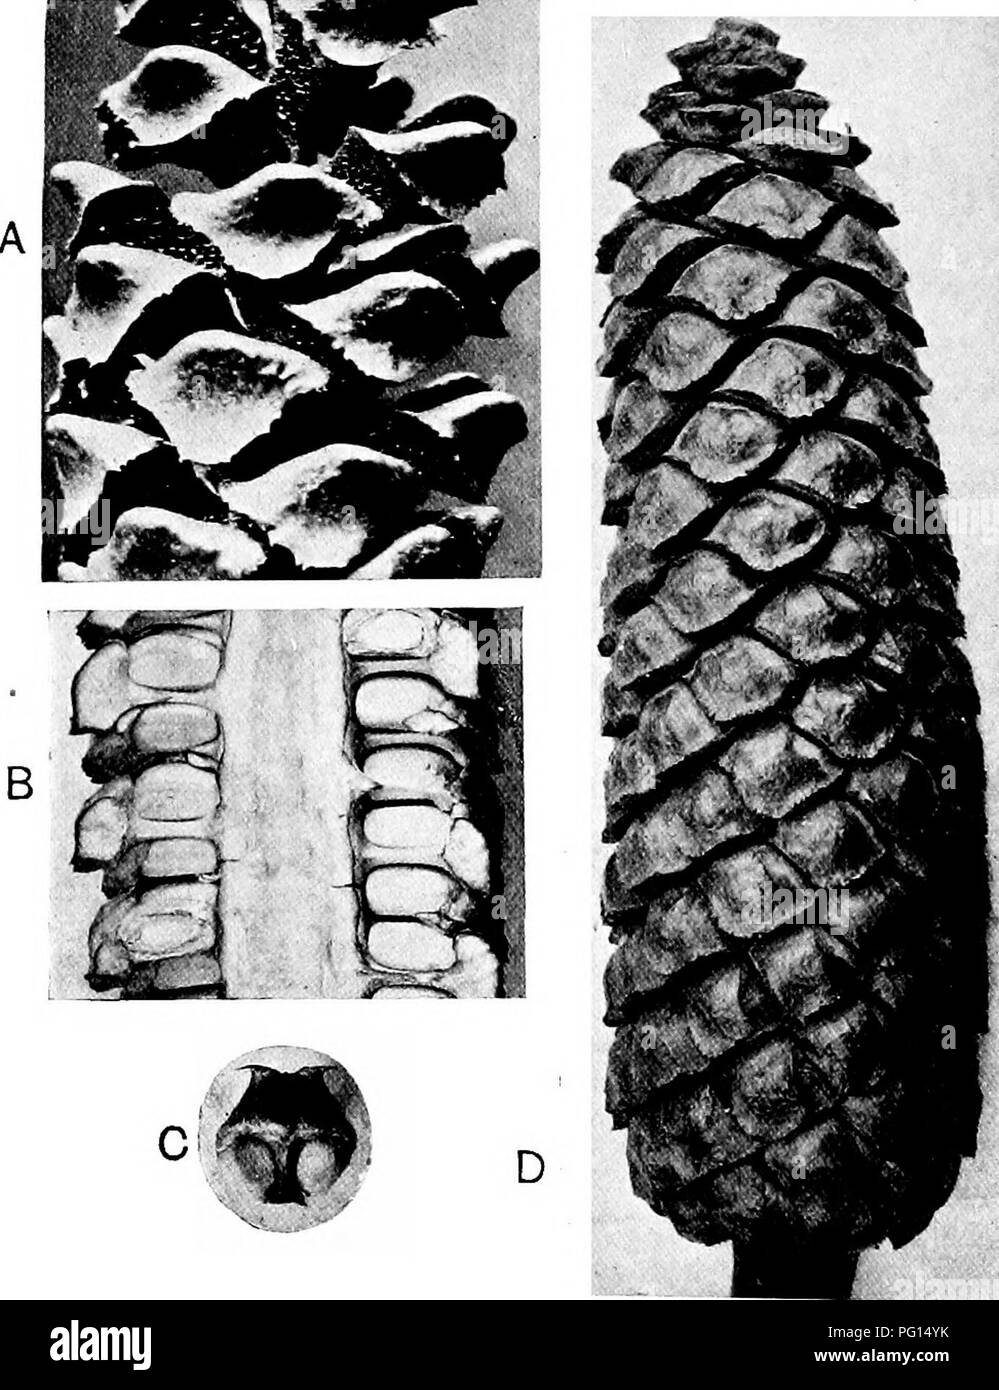 . Fossil plants : for students of botany and geology . Paleobotany. 22 CYCADALES [CH. goose's egg: the sterile distal end has the form of a spear-point with an irregularly serrate edge. In C. revoluta, C. pectinata, etc., the sterile part is deeply dissected and may break off (fig. 392, A) from the fertile portion of the sporophyll. The megasporophylls. Fia. 393. A. Stangeria paradoxa, part of microstrobilus. B, D. Encephalartos villosus, megastrobilus in surface-view and in section. ( nat. size.) C. Ceratozamia mexicana, single megasporophyll. of C. Riuminiana exhibit a striking variation in Stock Photo